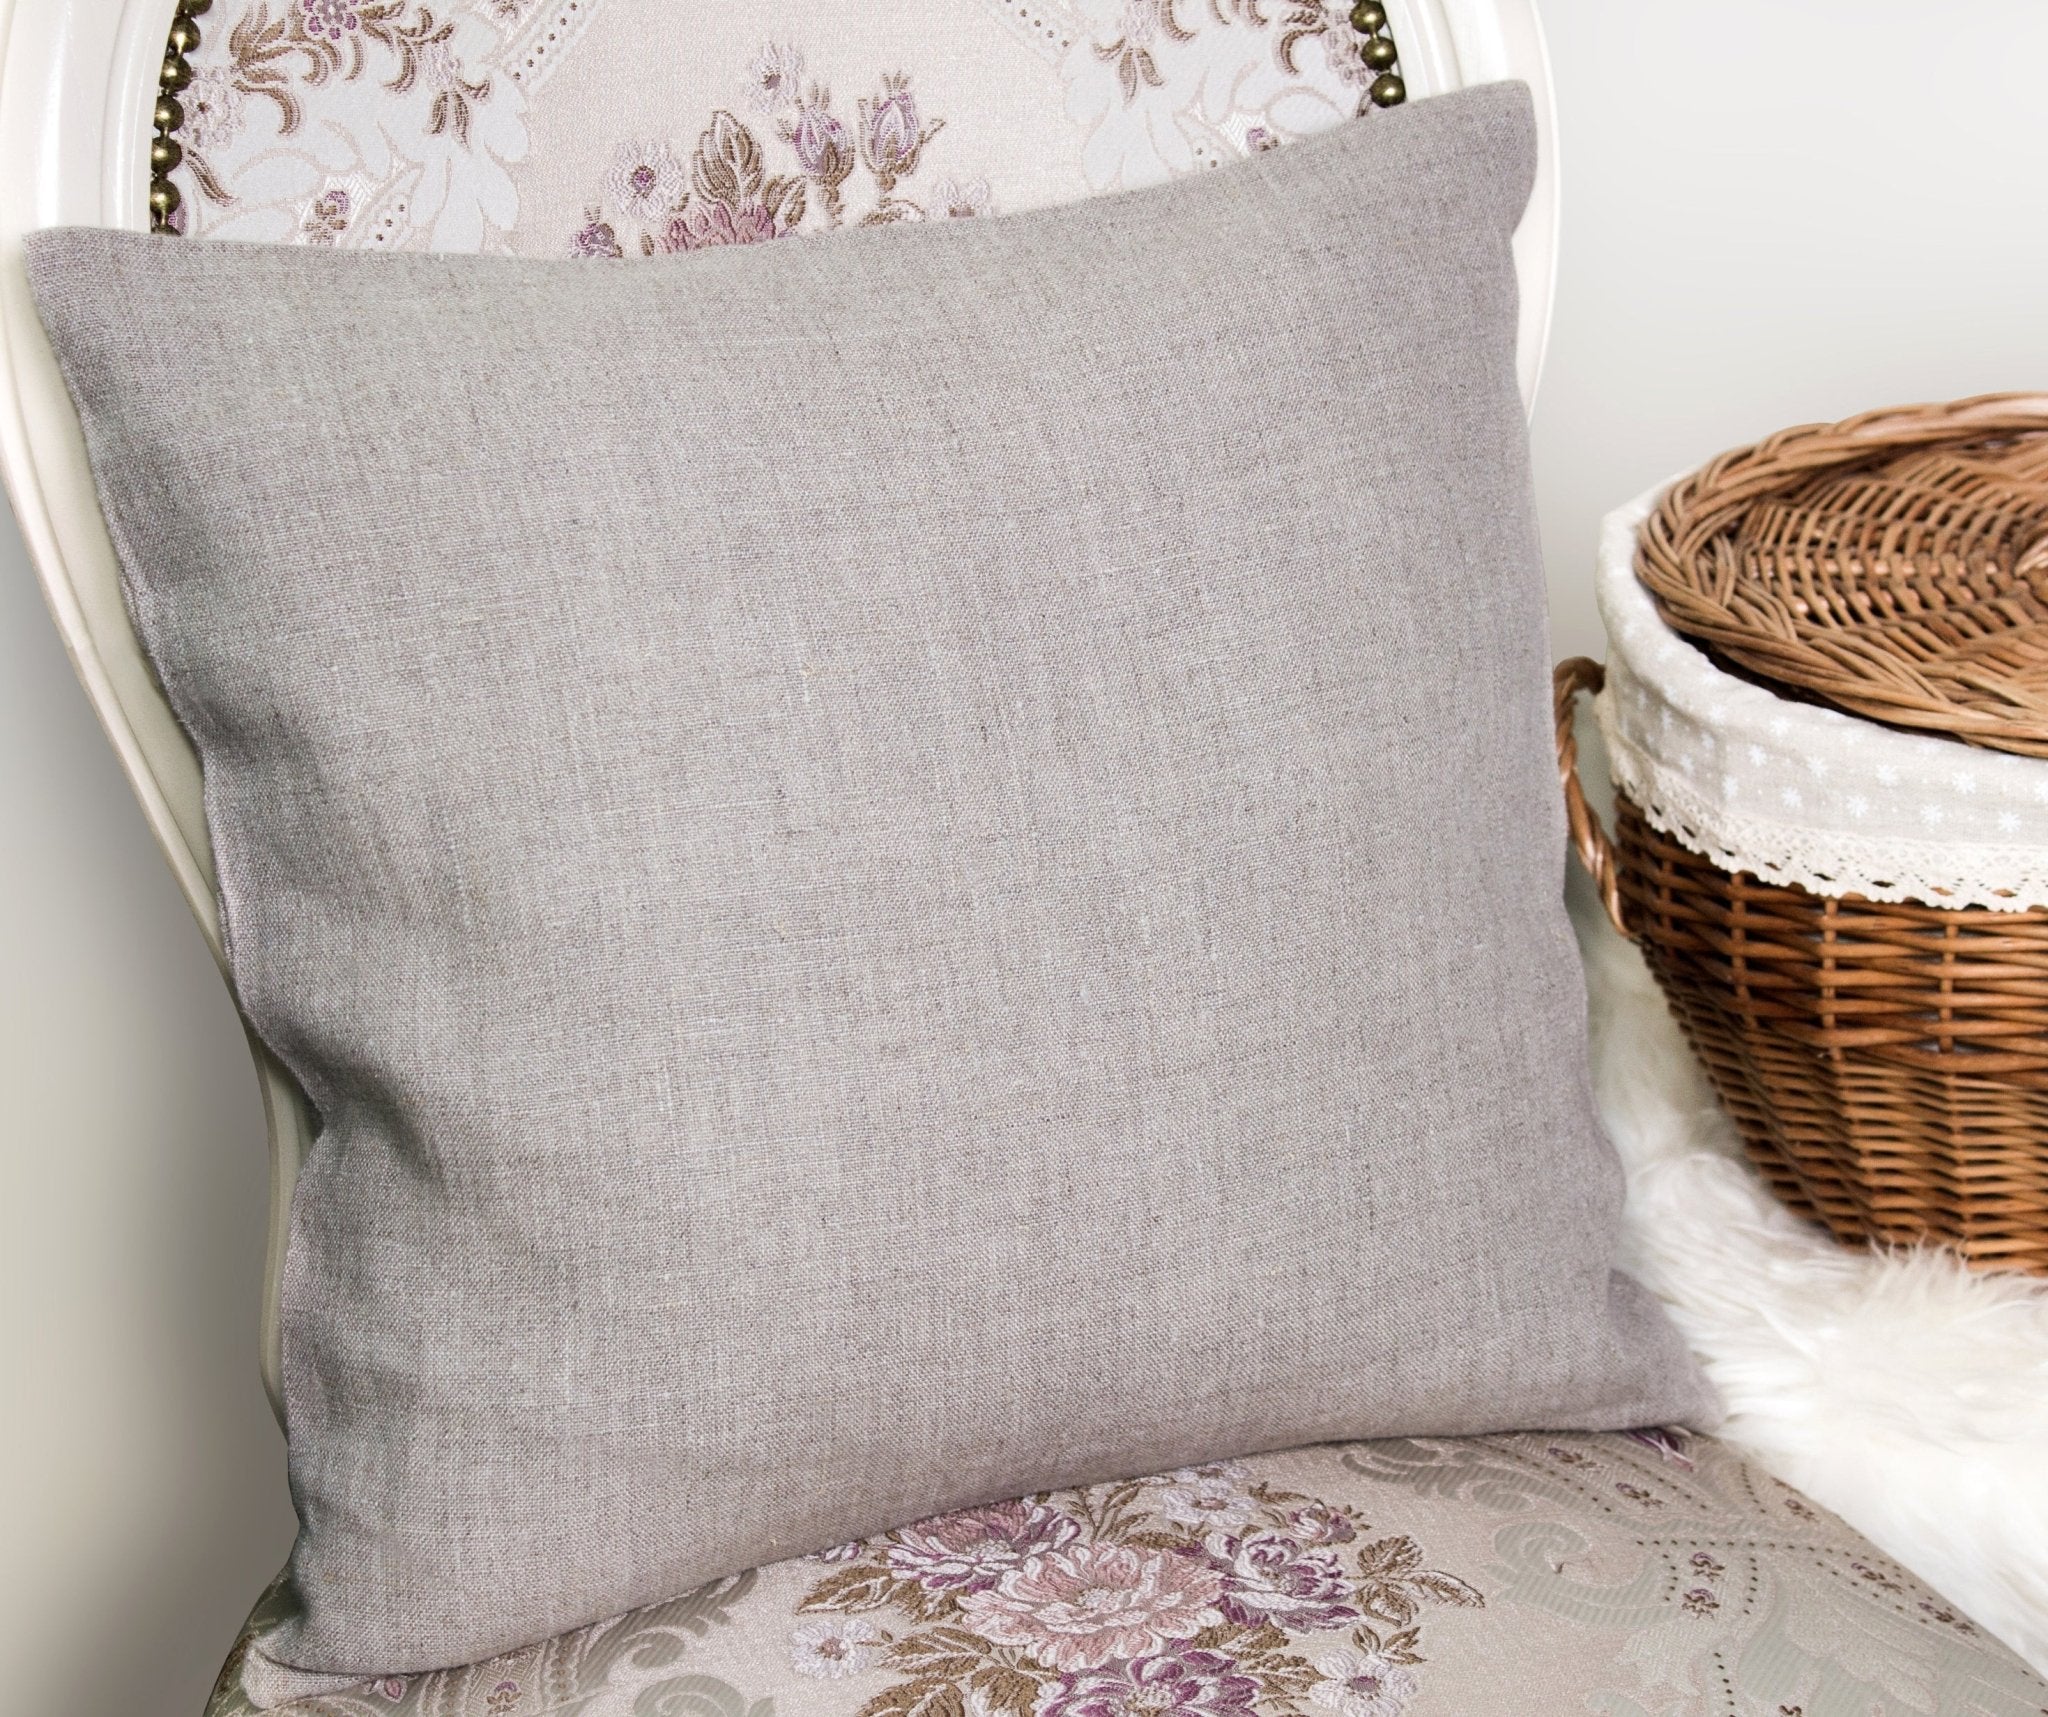  Mixing Patterns with Confidence: Styling Tips for Block-Printed Pillow Covers - FABDIVINE LLC